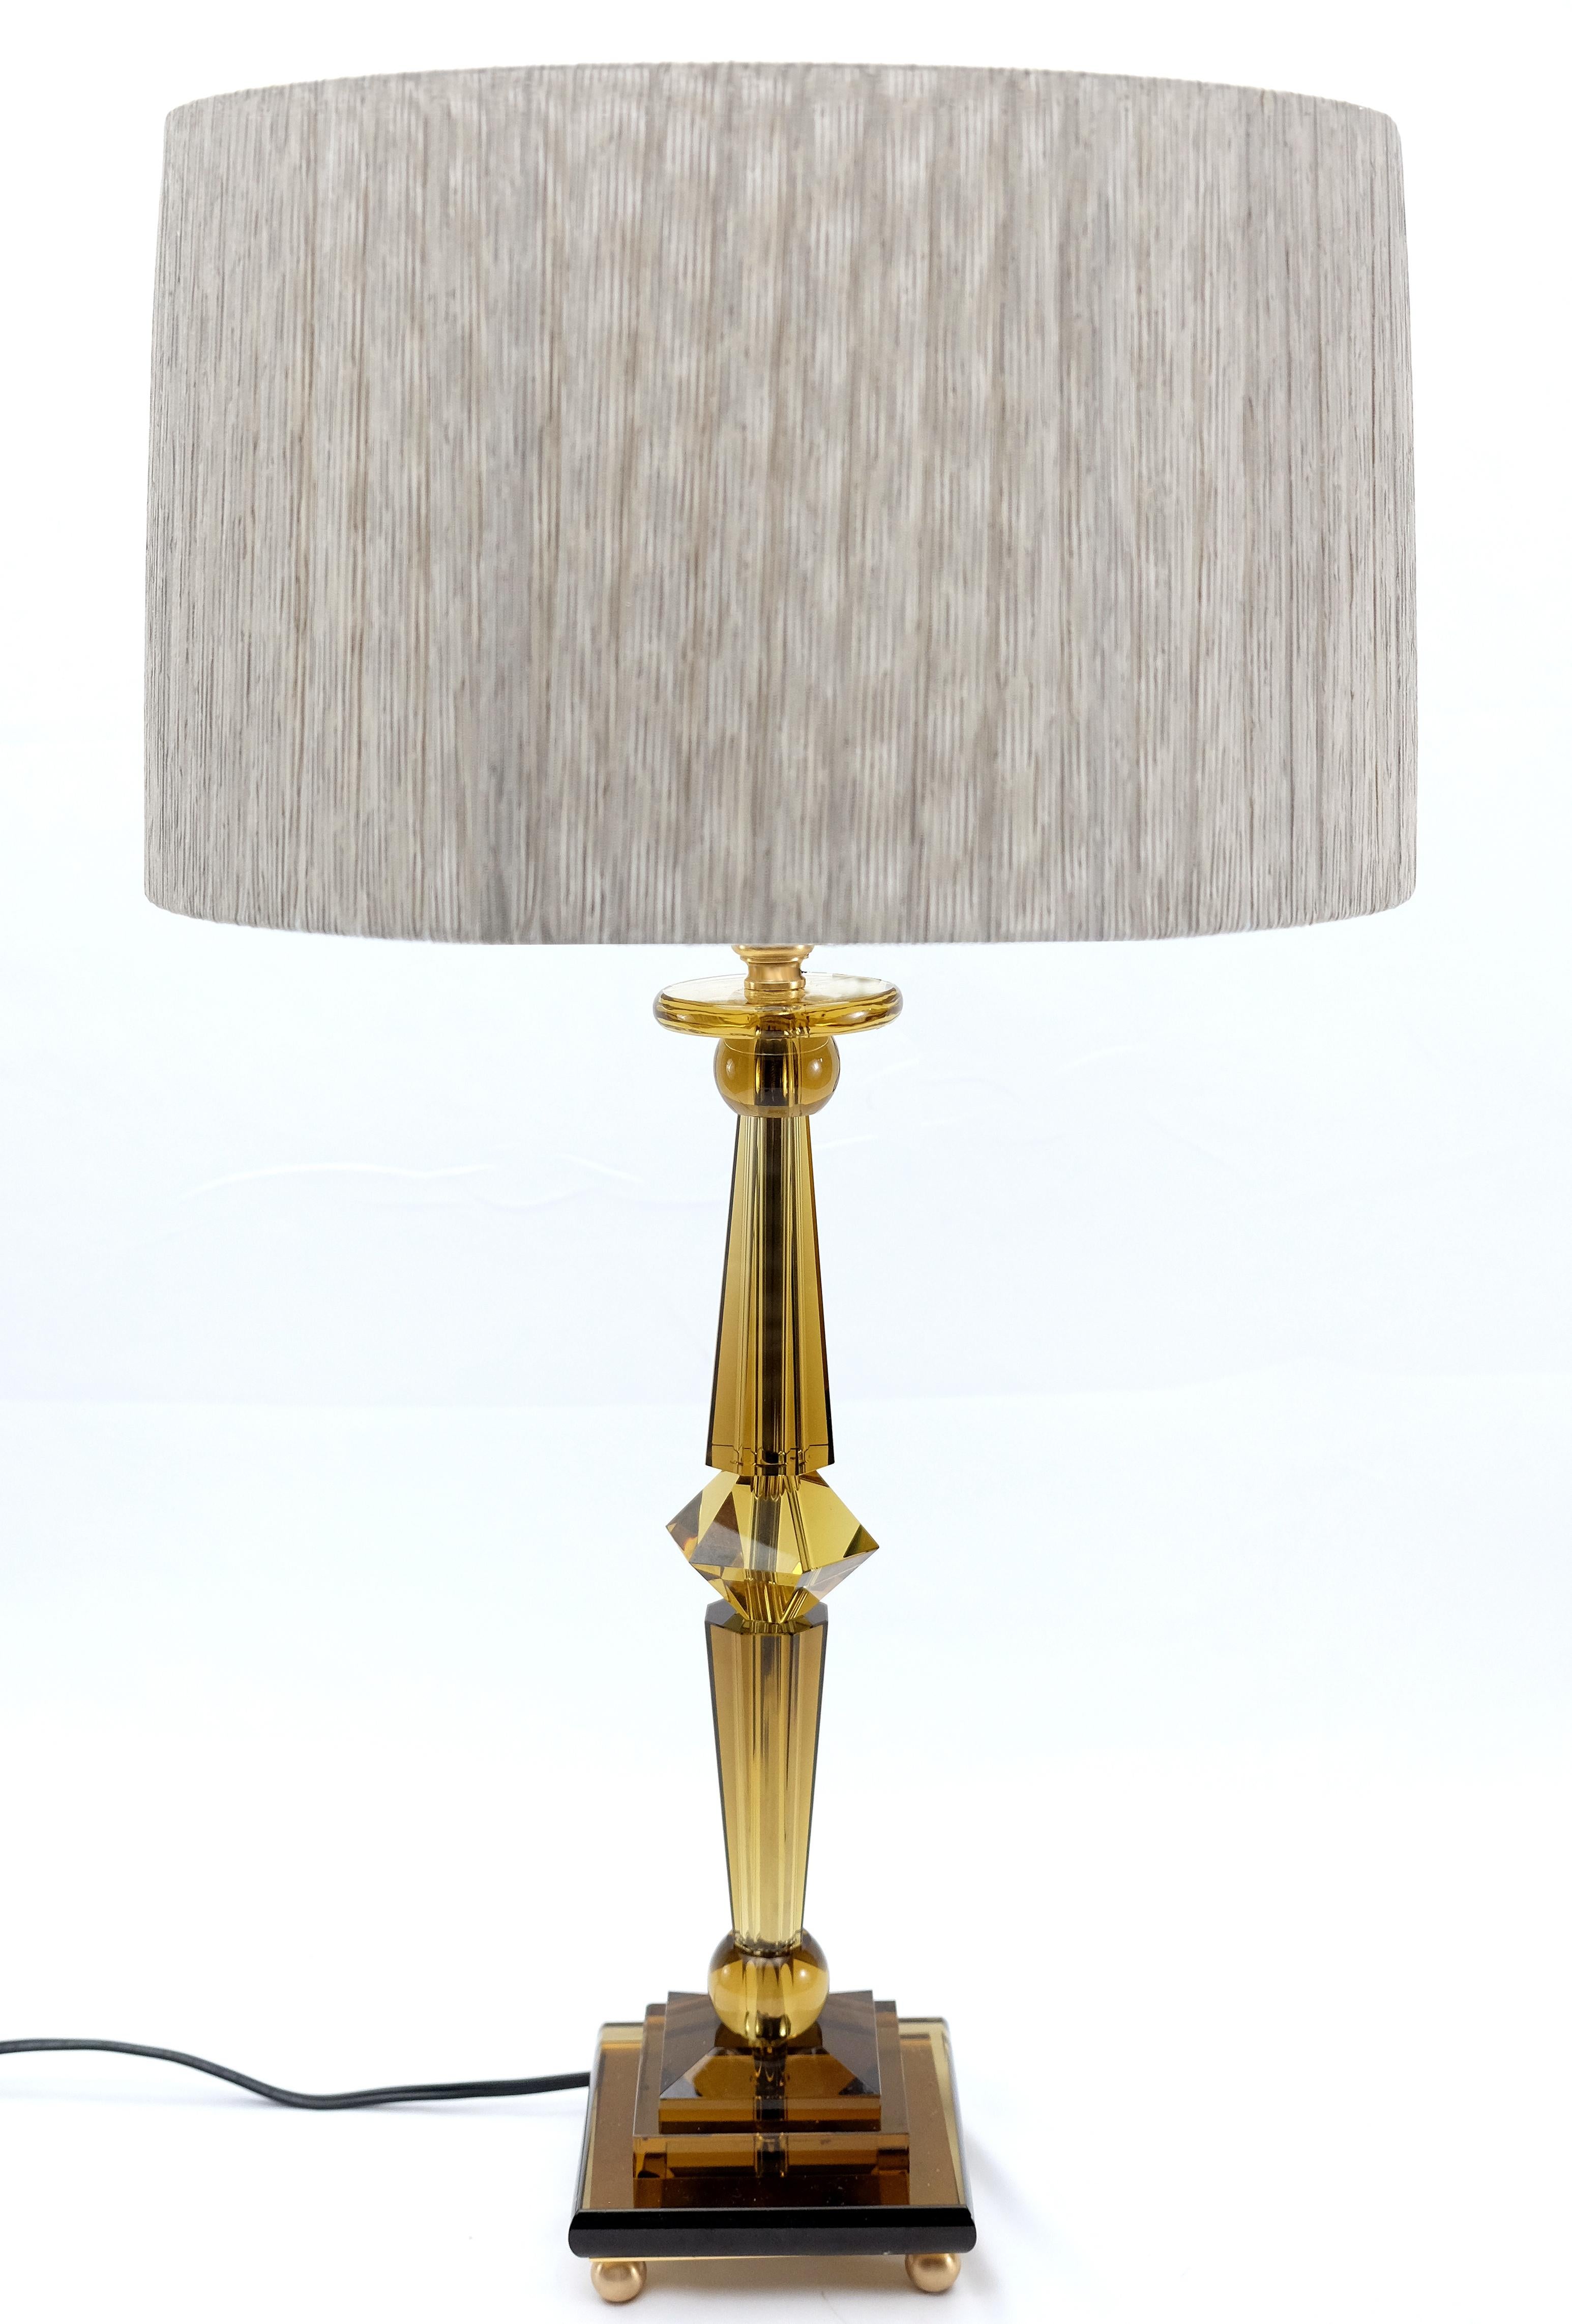 Attilio Amato for Laudarte Srl Prisma Big Table Lamp, Pair Available

Offered for sale is a stunning 